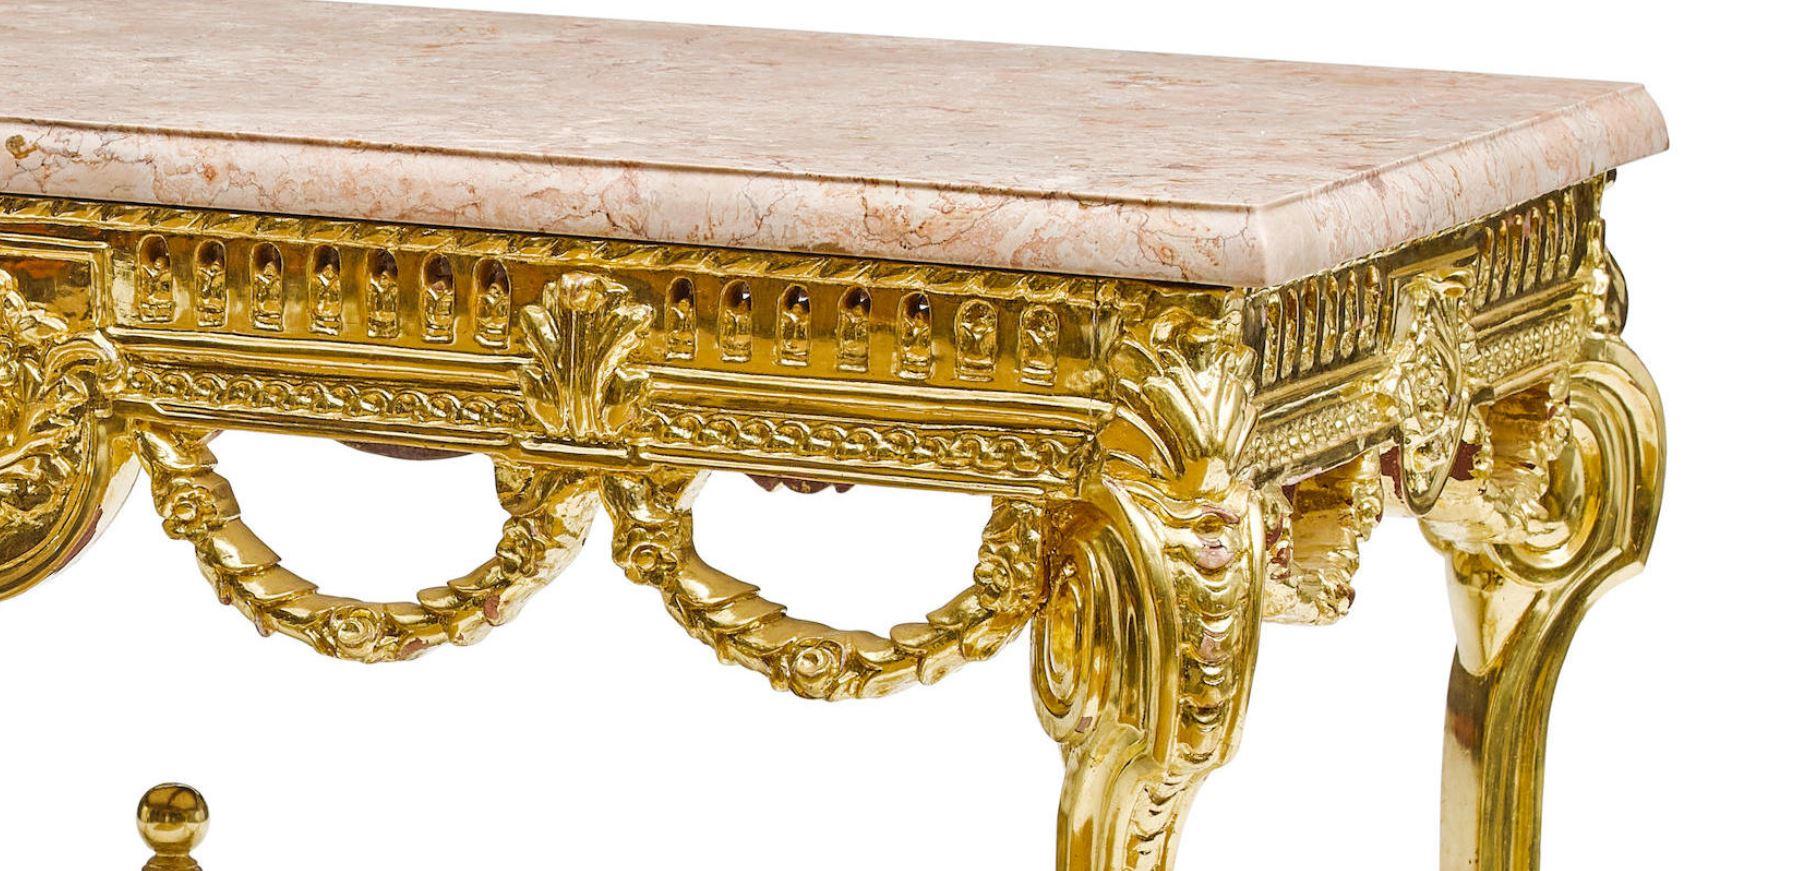 Louis XVI French Marble-Top Carved Gold Leafed Console Table